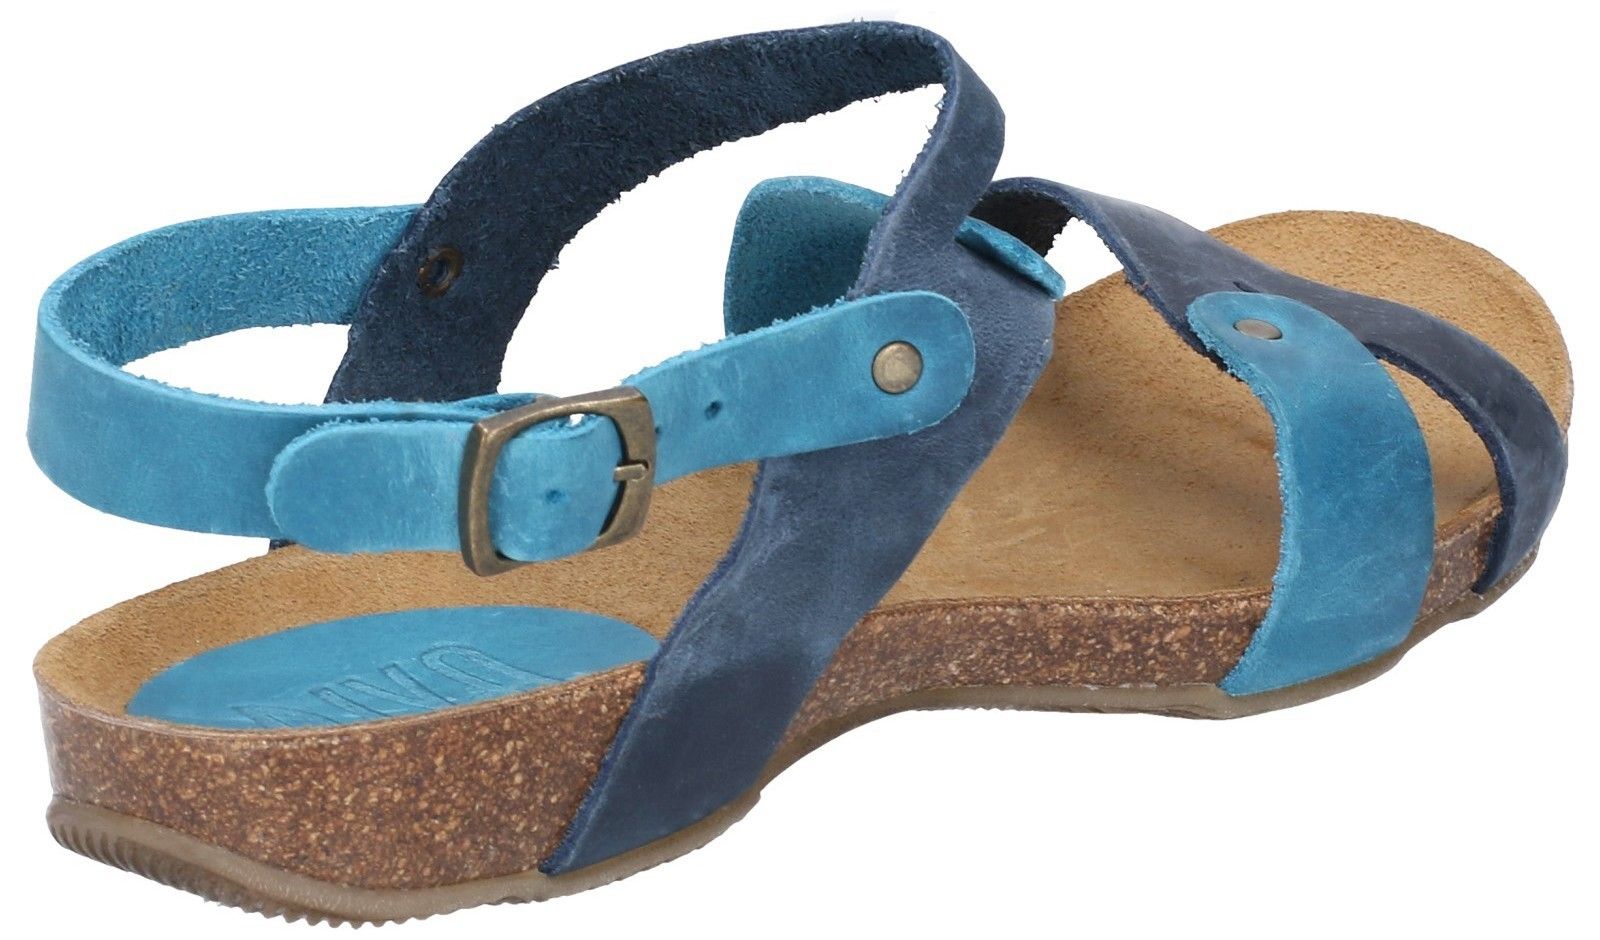 Women's comfort beach sandal with supple multi-coloured leather uppers and stud decorations.Women's fun beach sandal with brightly coloured straps. 
Supple leather uppers with stylish stud features. 
Open toe design with mid Z-strap. 
Adjustable ankle strap with buckle closure. 
Ergonomically designed footbed with comfort toe bridge.